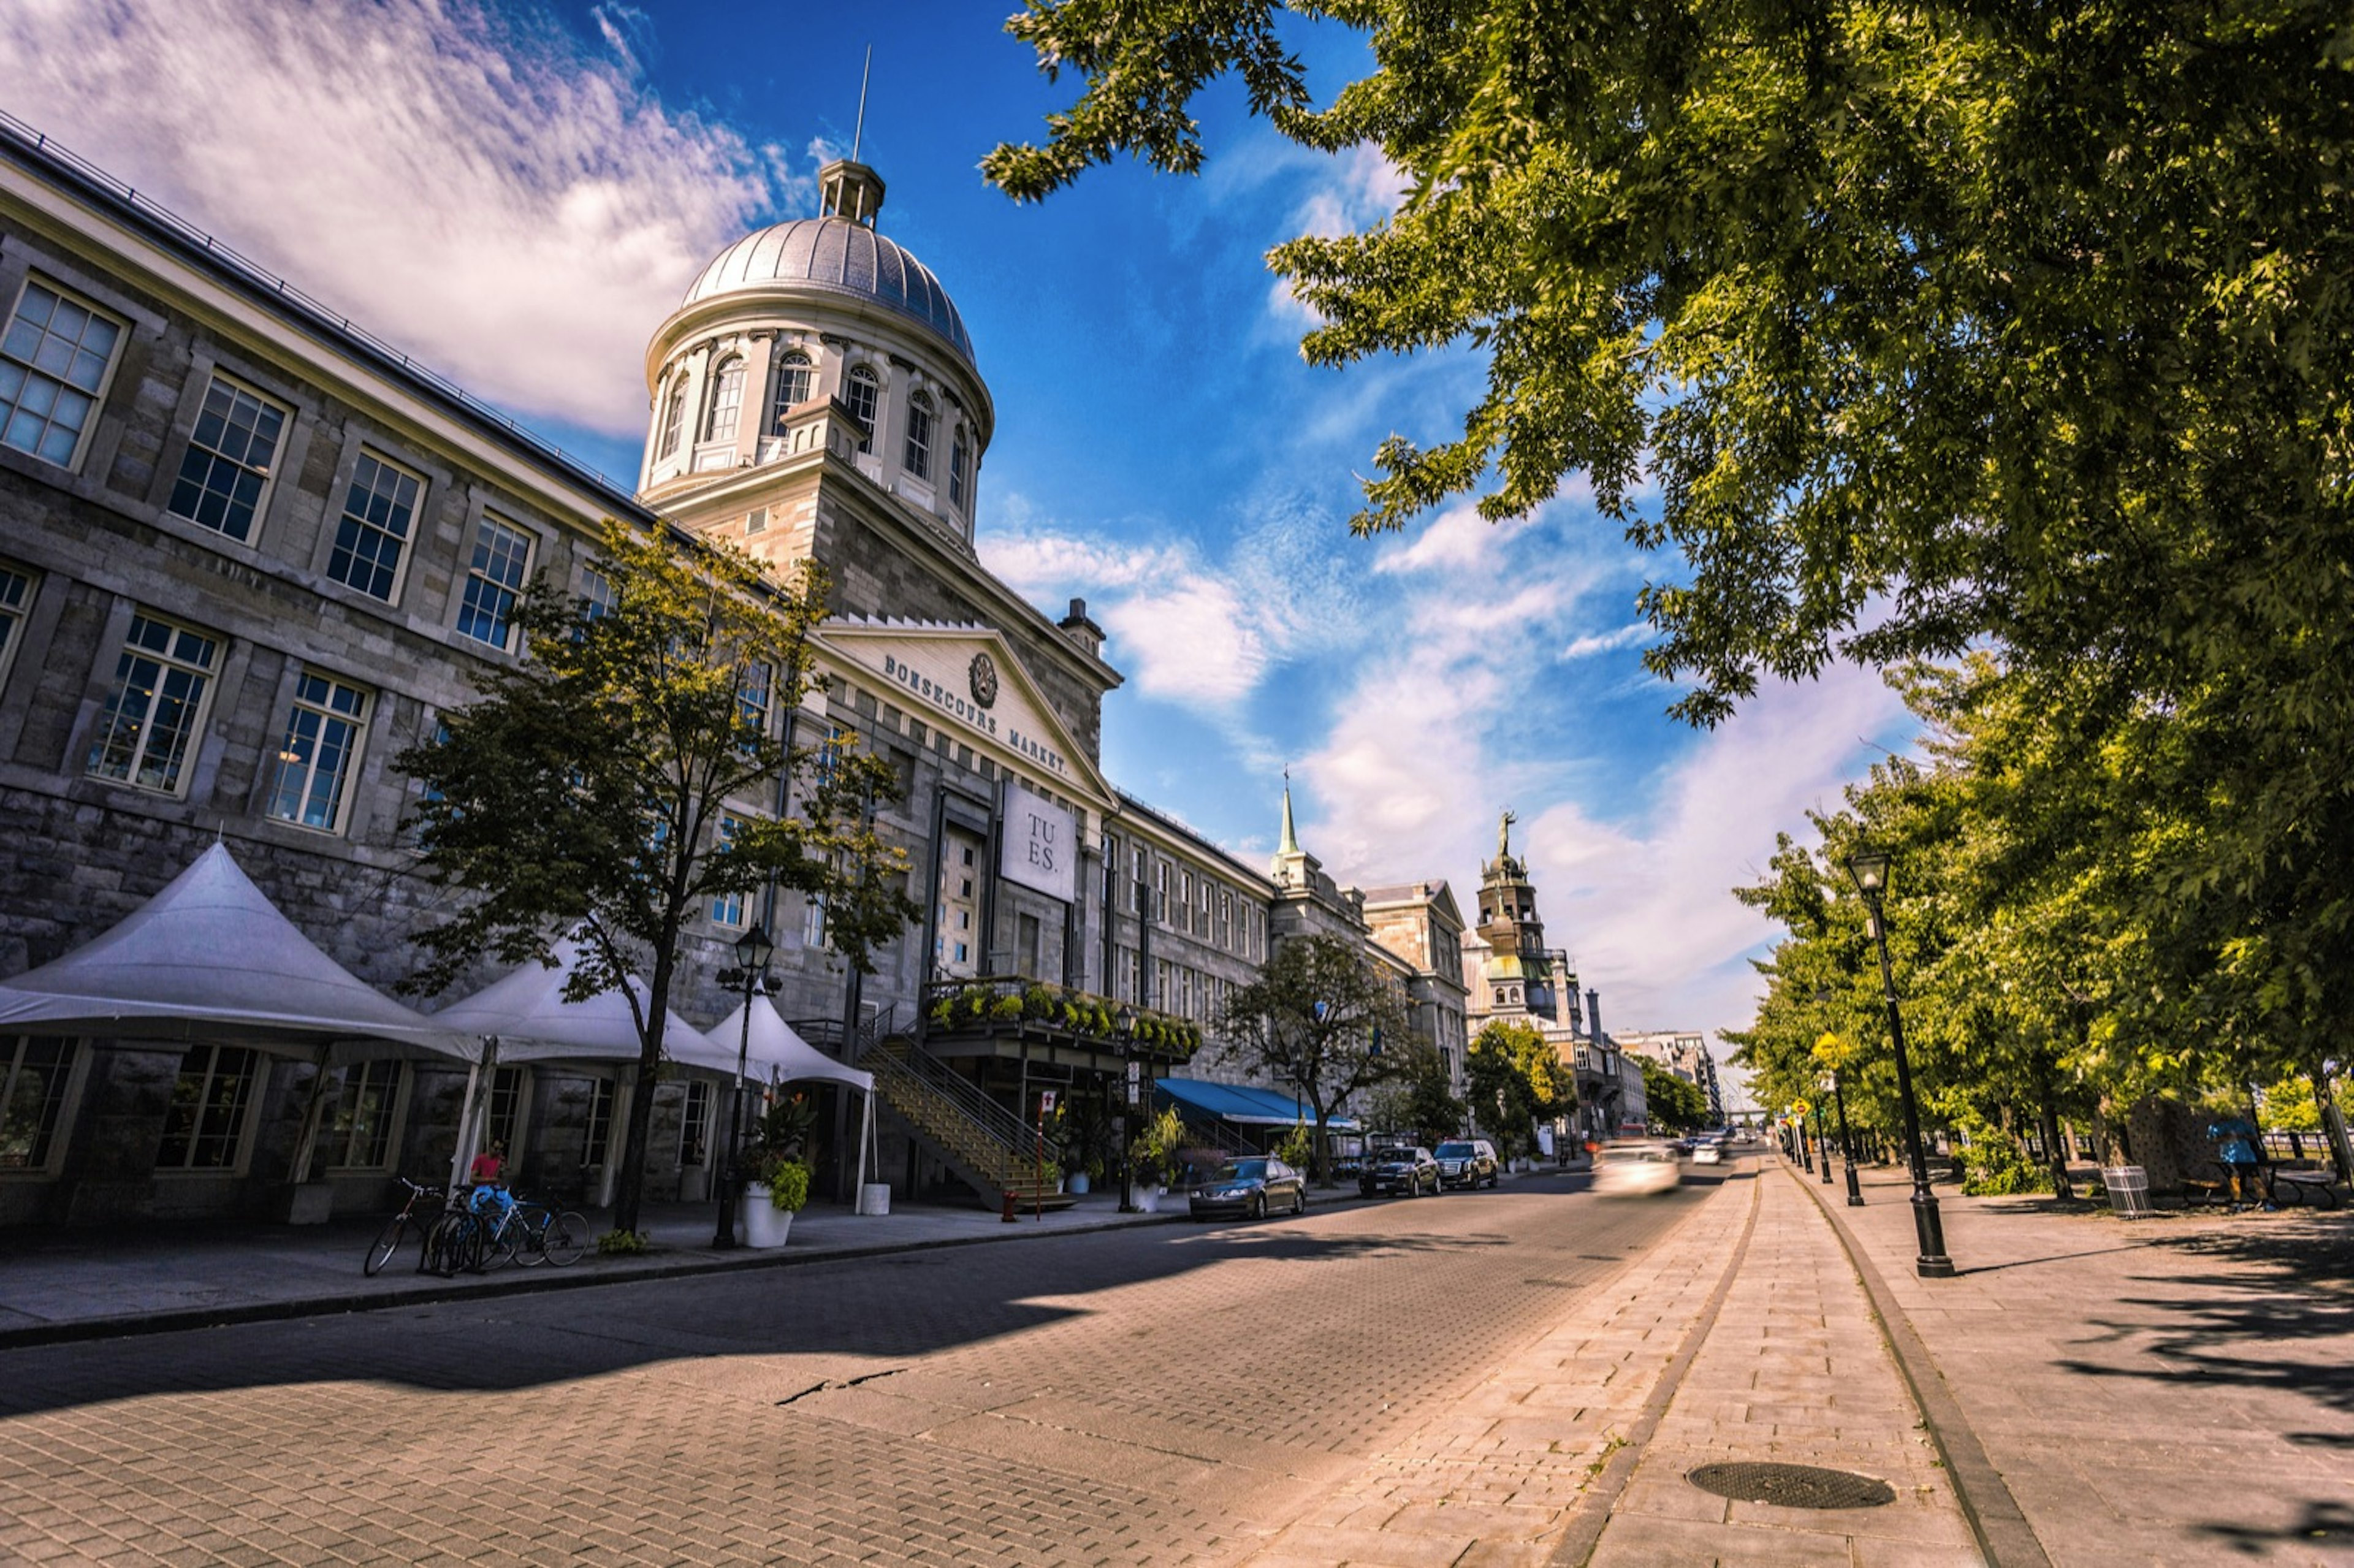 The Bonsecours Market of Montreal sits along a cobblestone street on a beautiful clear day